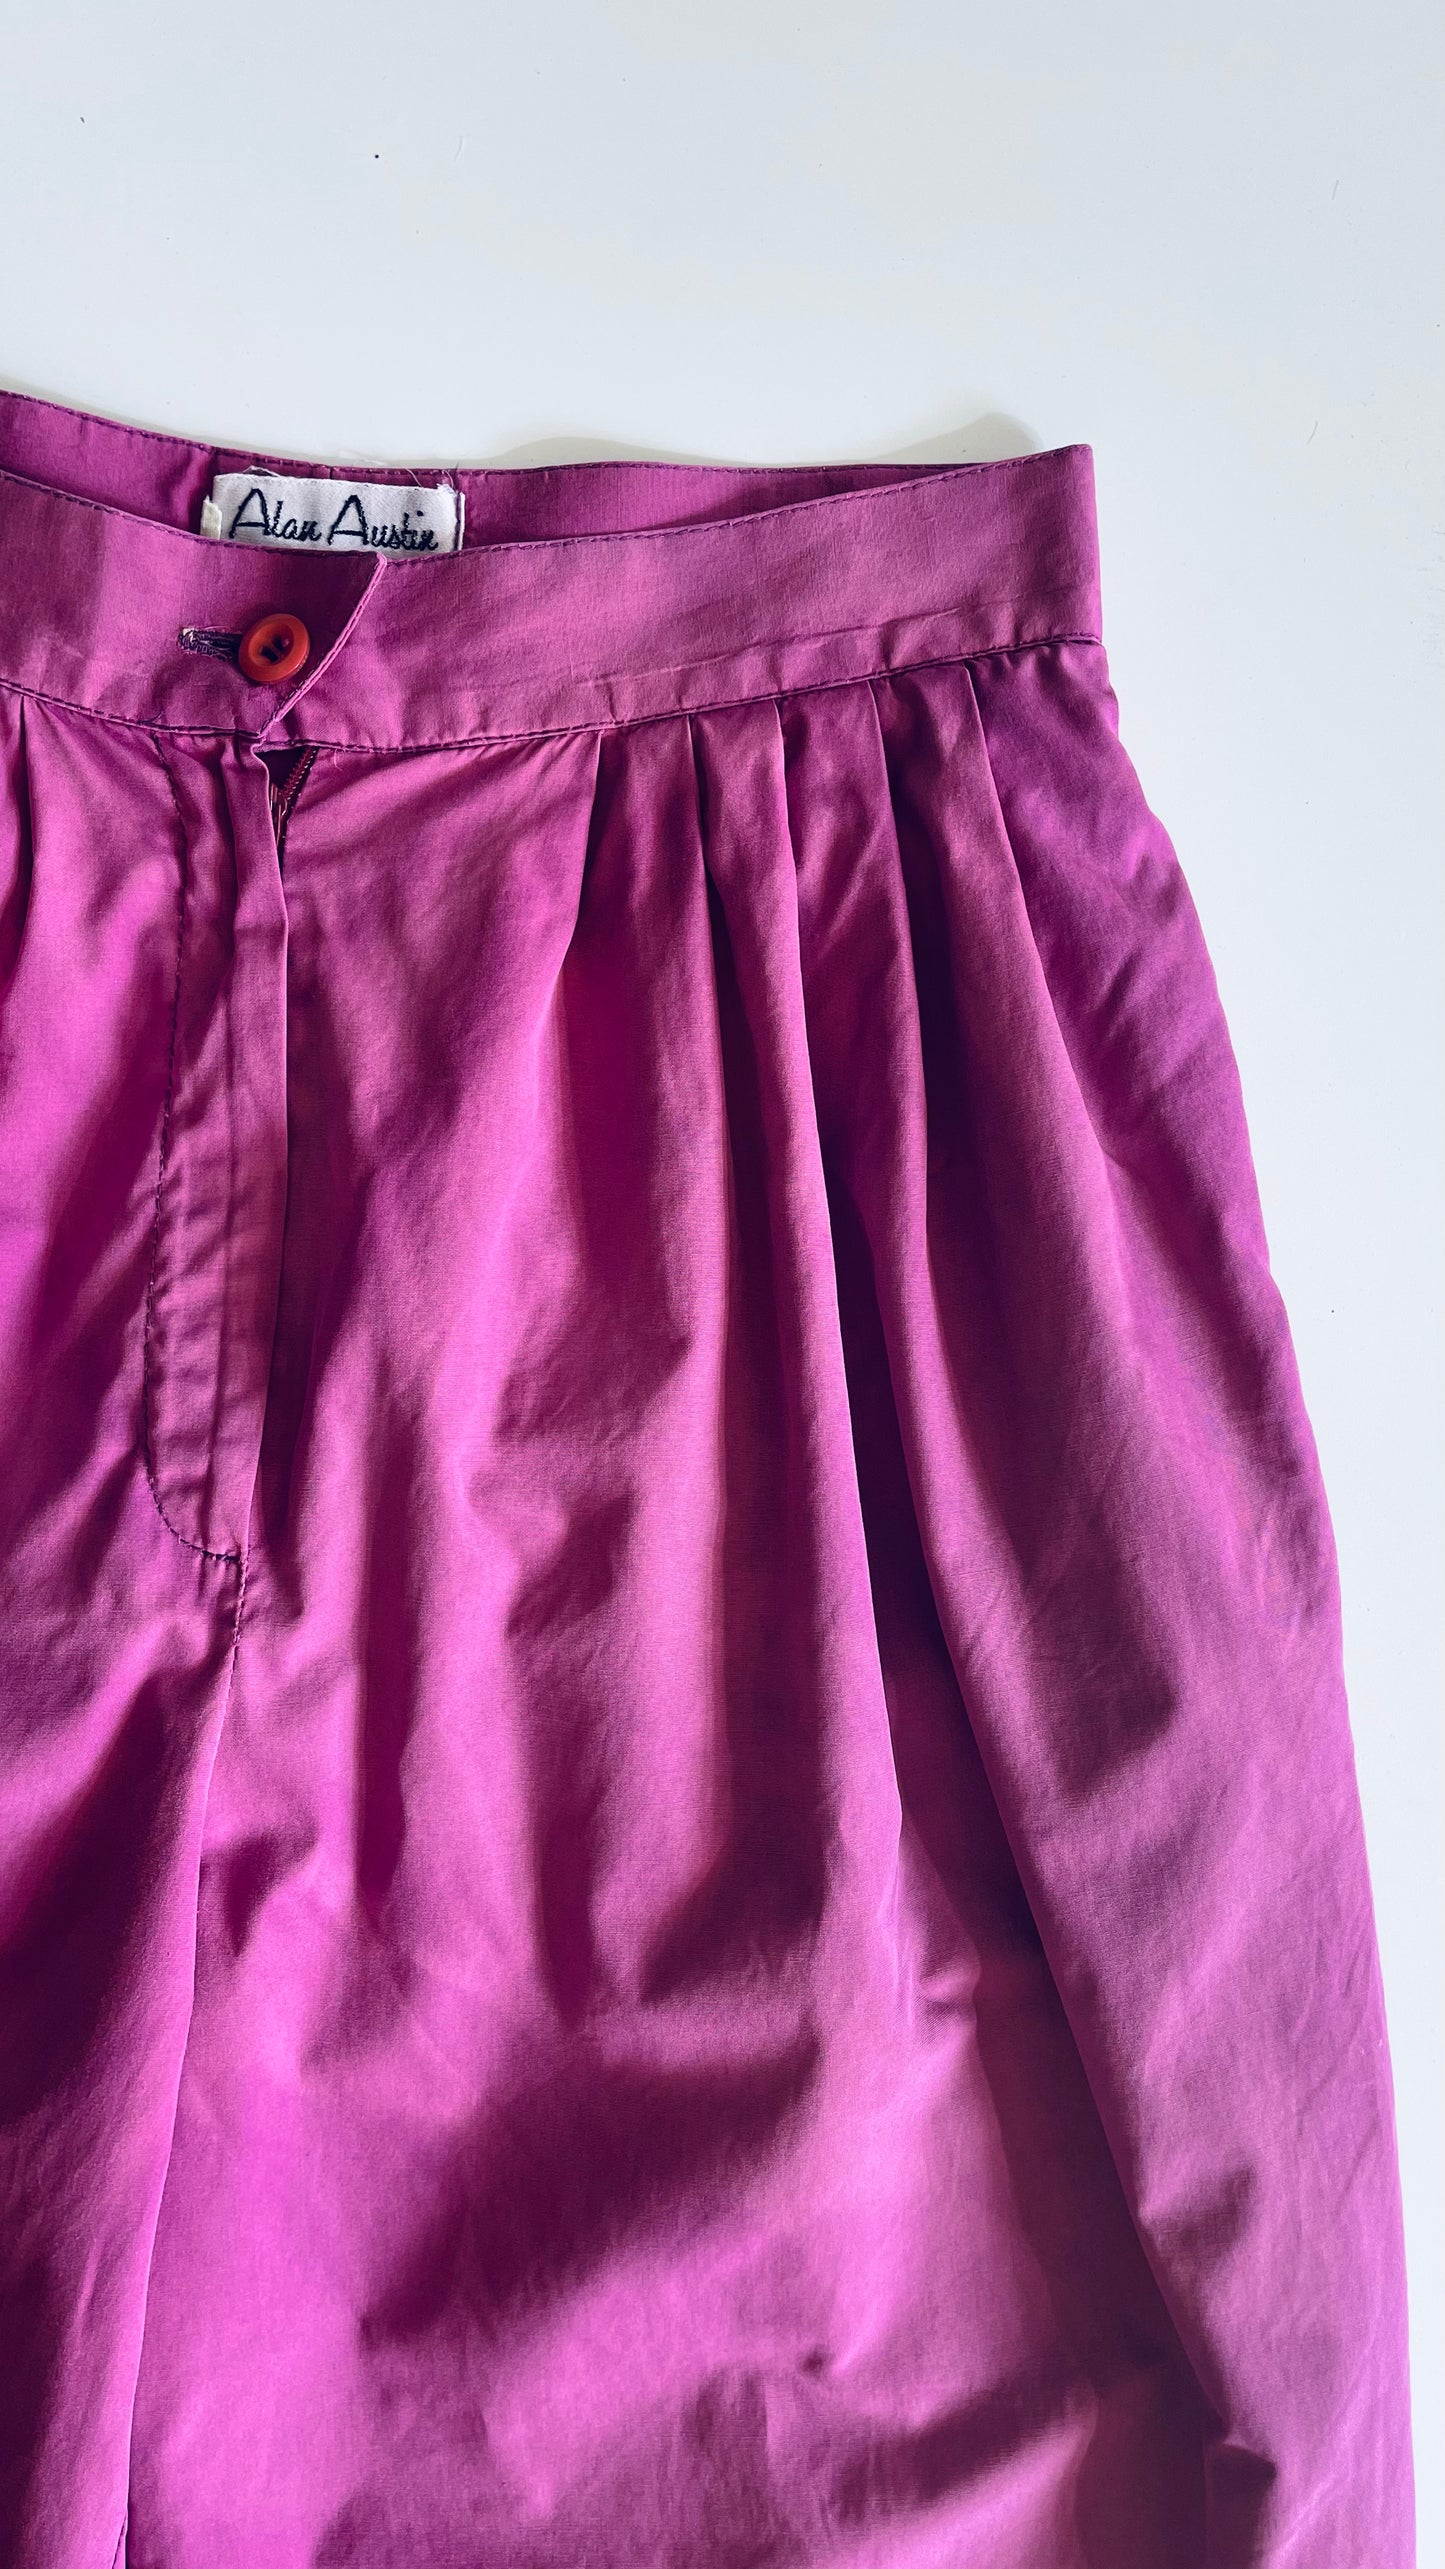 Vintage 80s fuchsia pink high rise trousers - Size 6